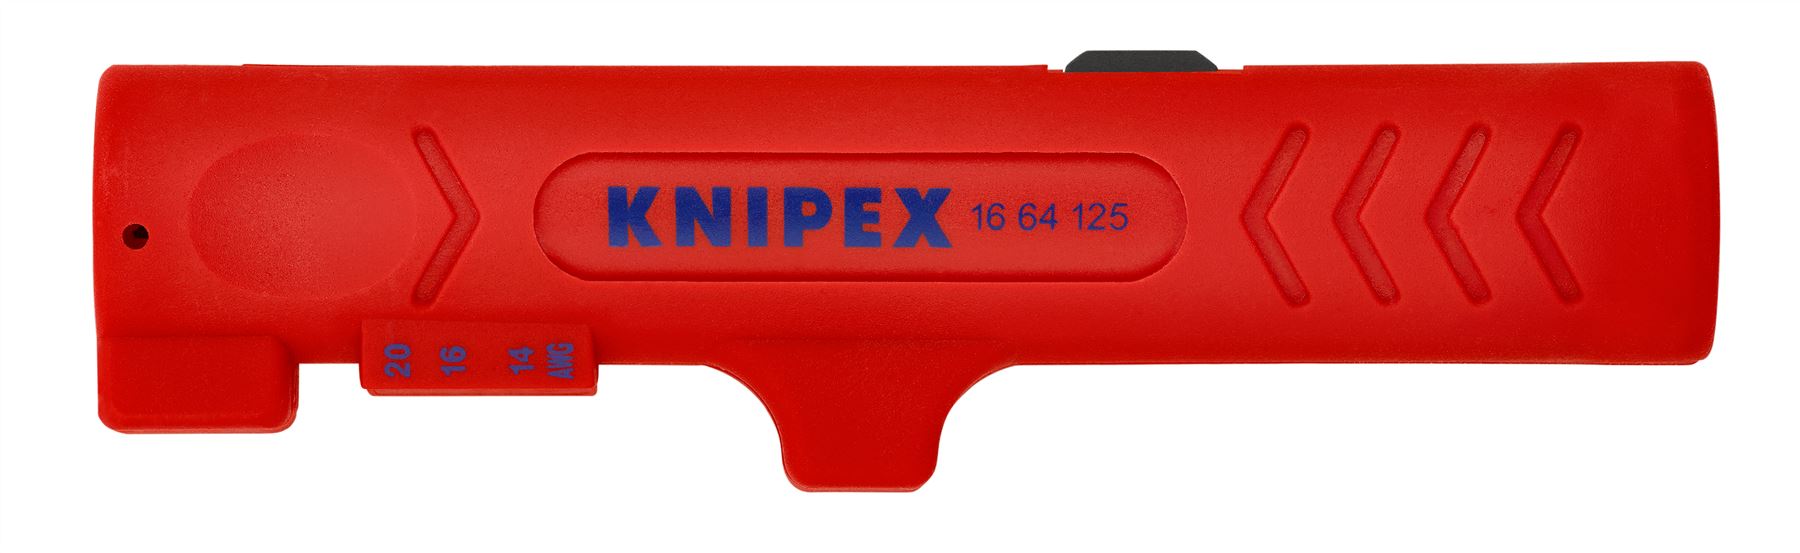 Knipex Stripping Tool for Flat and Round Cable 125mm Dismantling Tool for Data Cable 16 64 125 SB